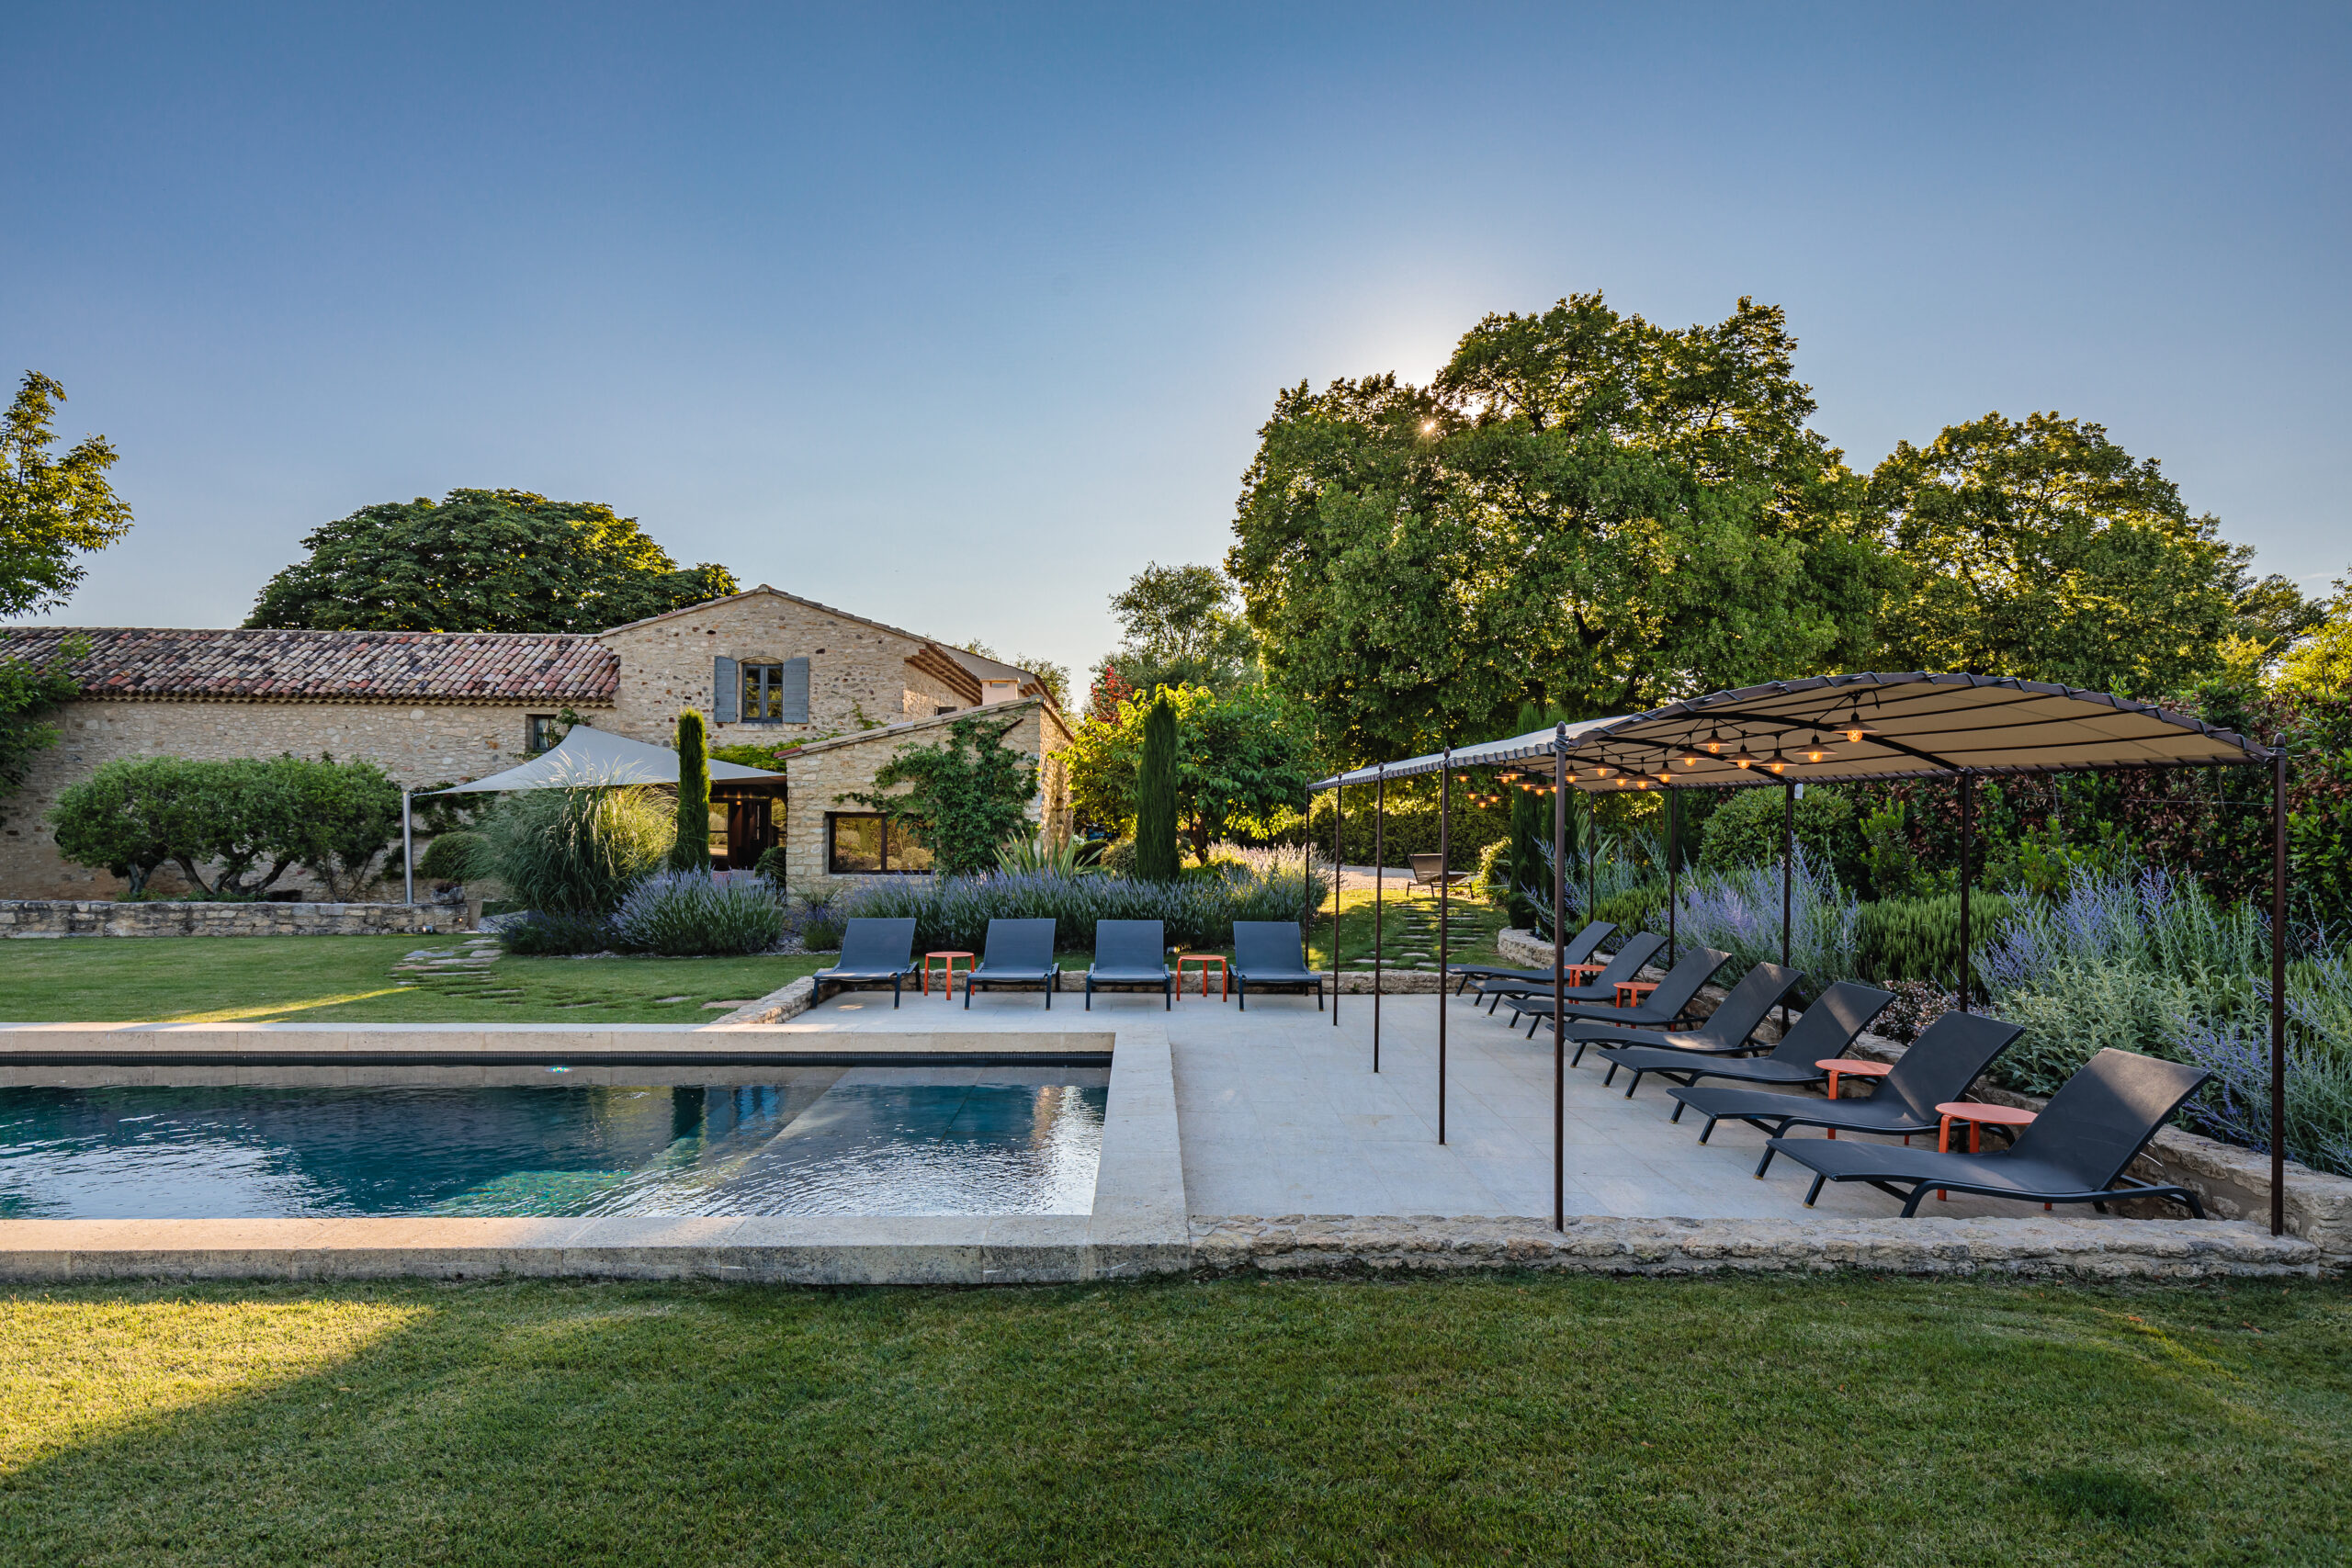 Backyard private pool and lounge area of a stone Inspirato luxury villa in Provence, France.